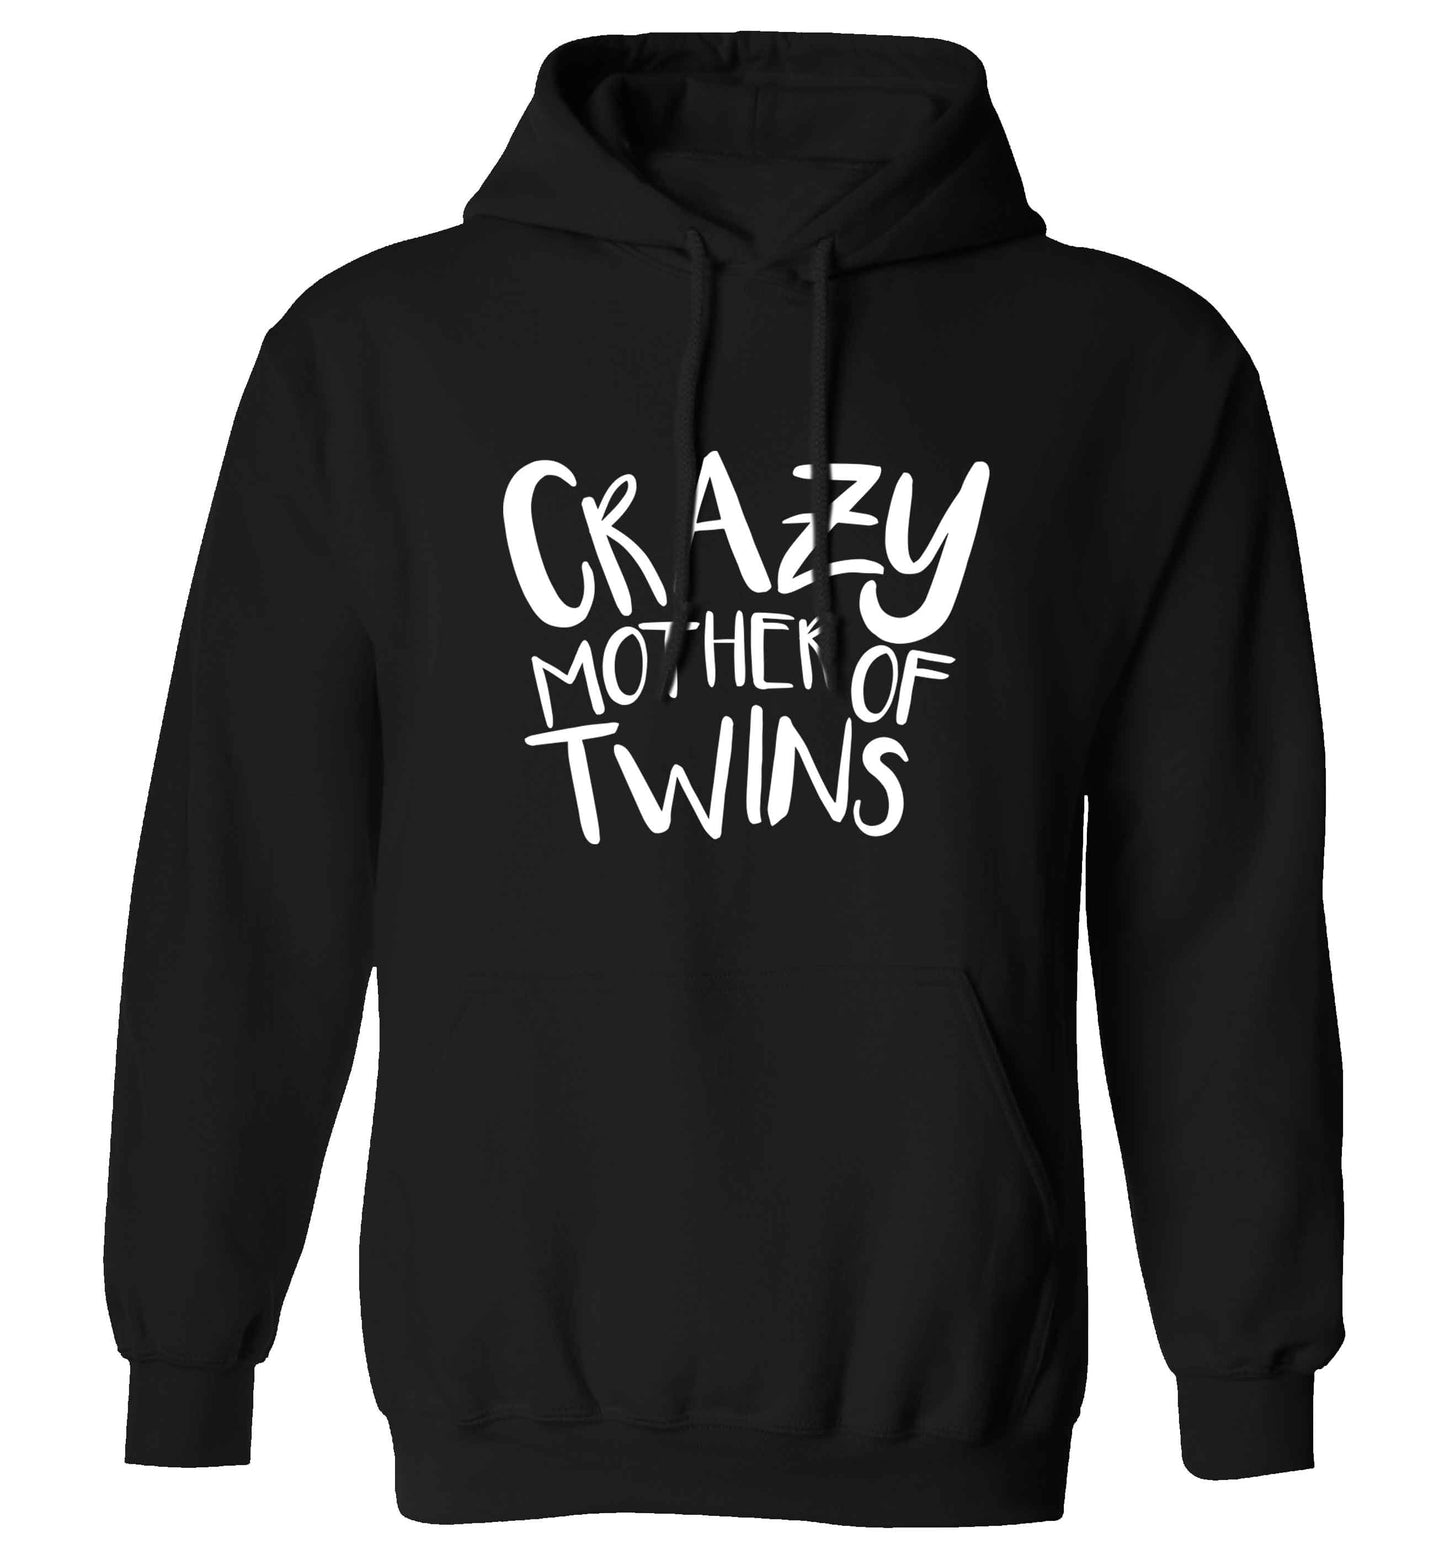 Crazy mother of twins adults unisex black hoodie 2XL